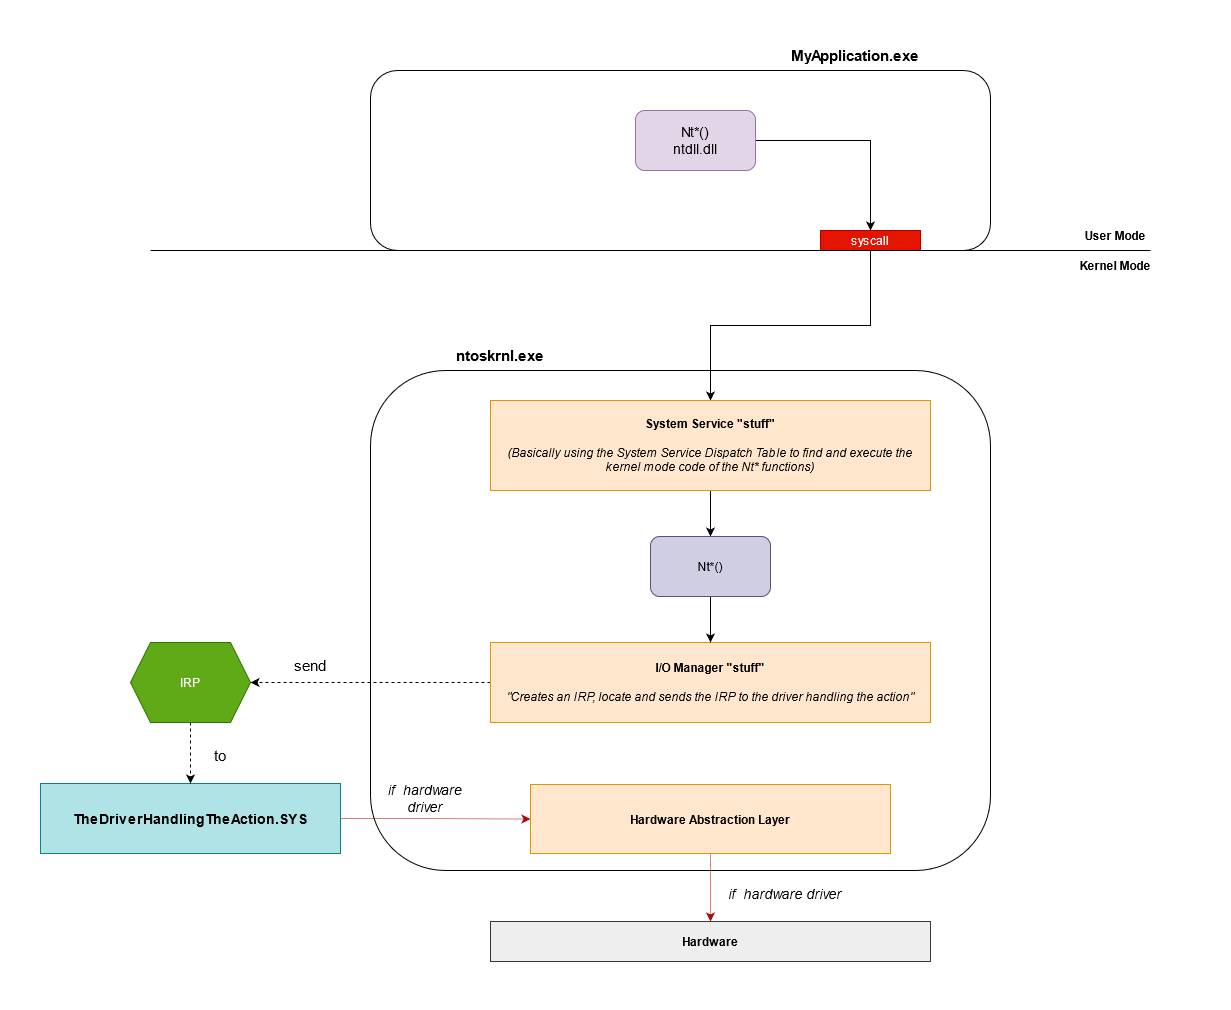 Illustration of a possible Nt functions workflow*